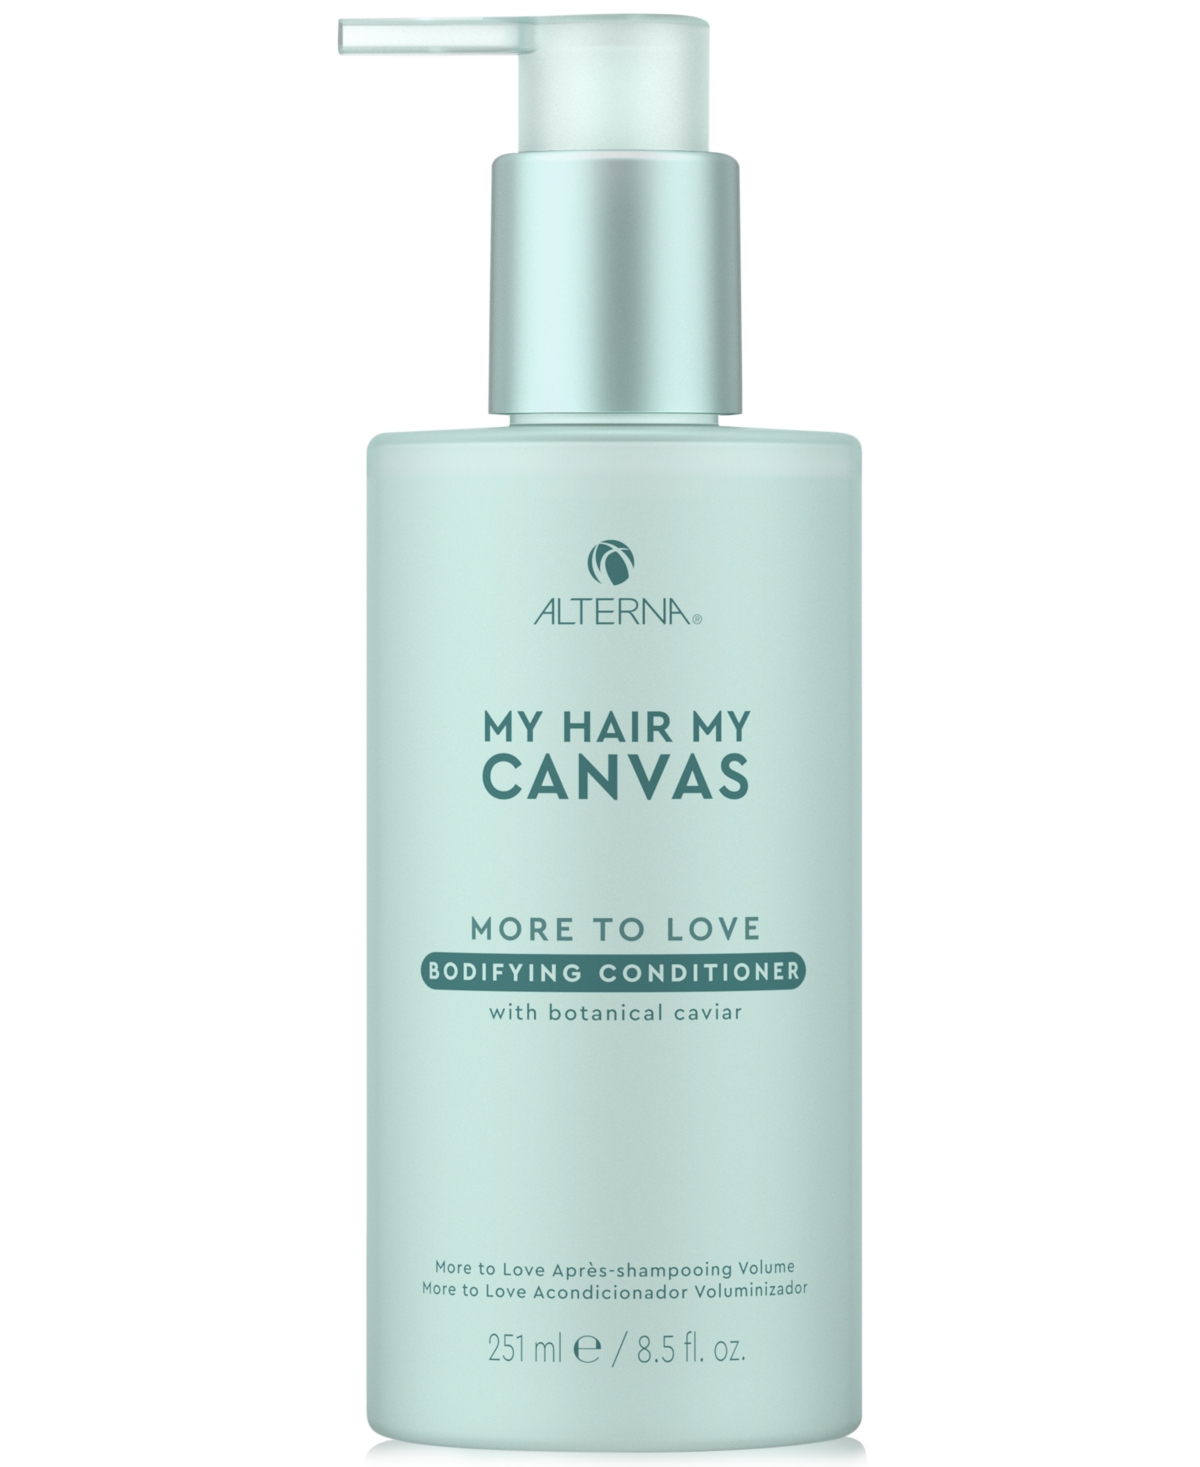 Alterna My Hair My Canvas More To Love Bodifying Conditioner, 8.5-oz.